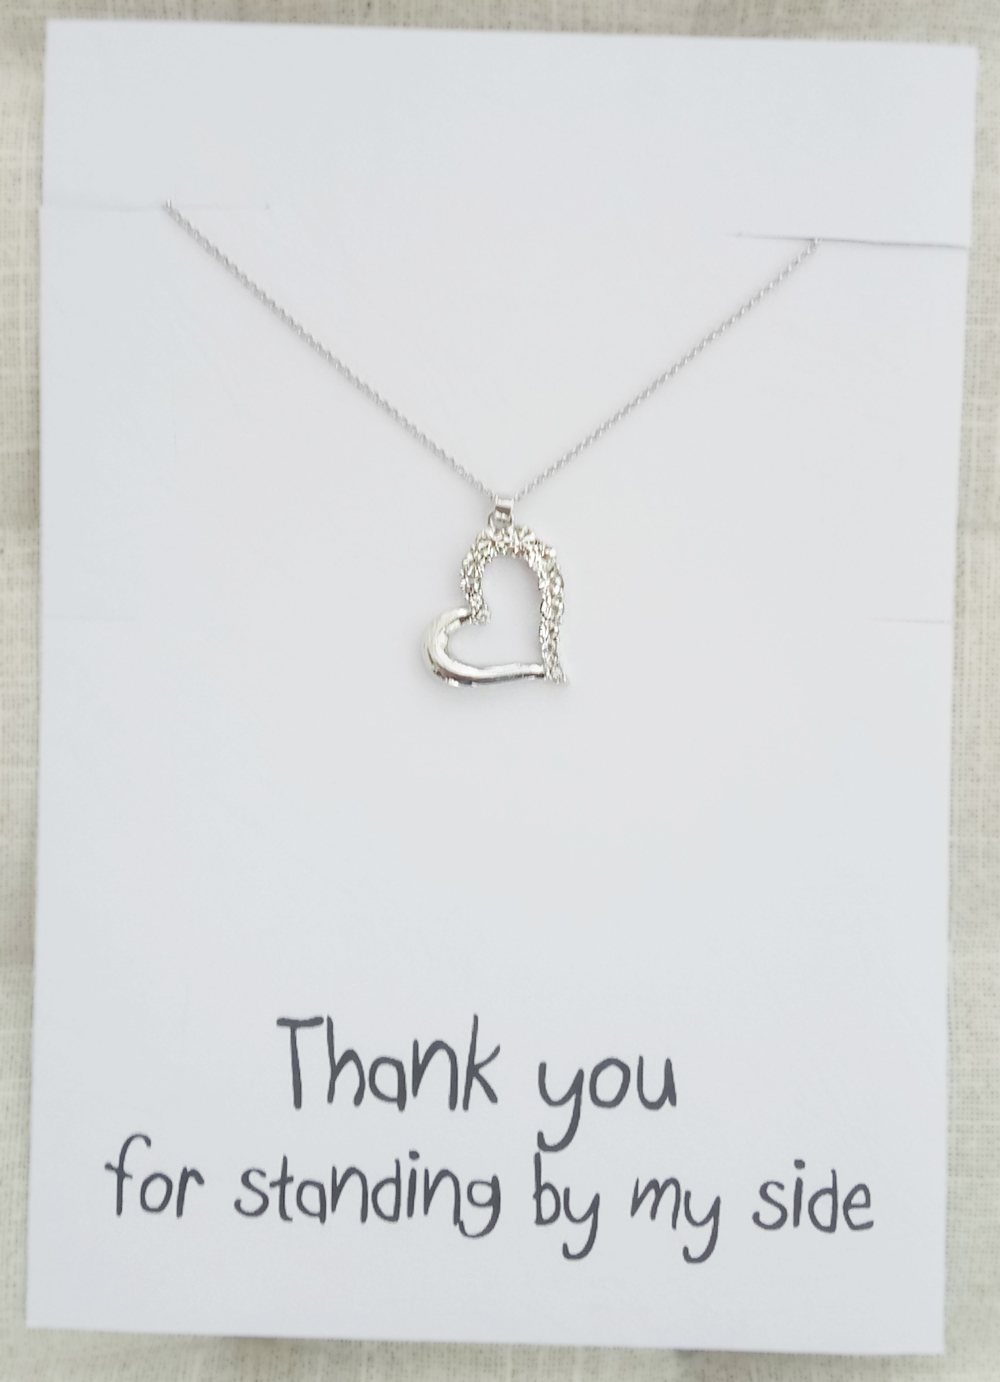 Silver Toned Heart Rhinestones Pendant Thank You Friends And Family Gift Card Girl Fashion Woman Necklace